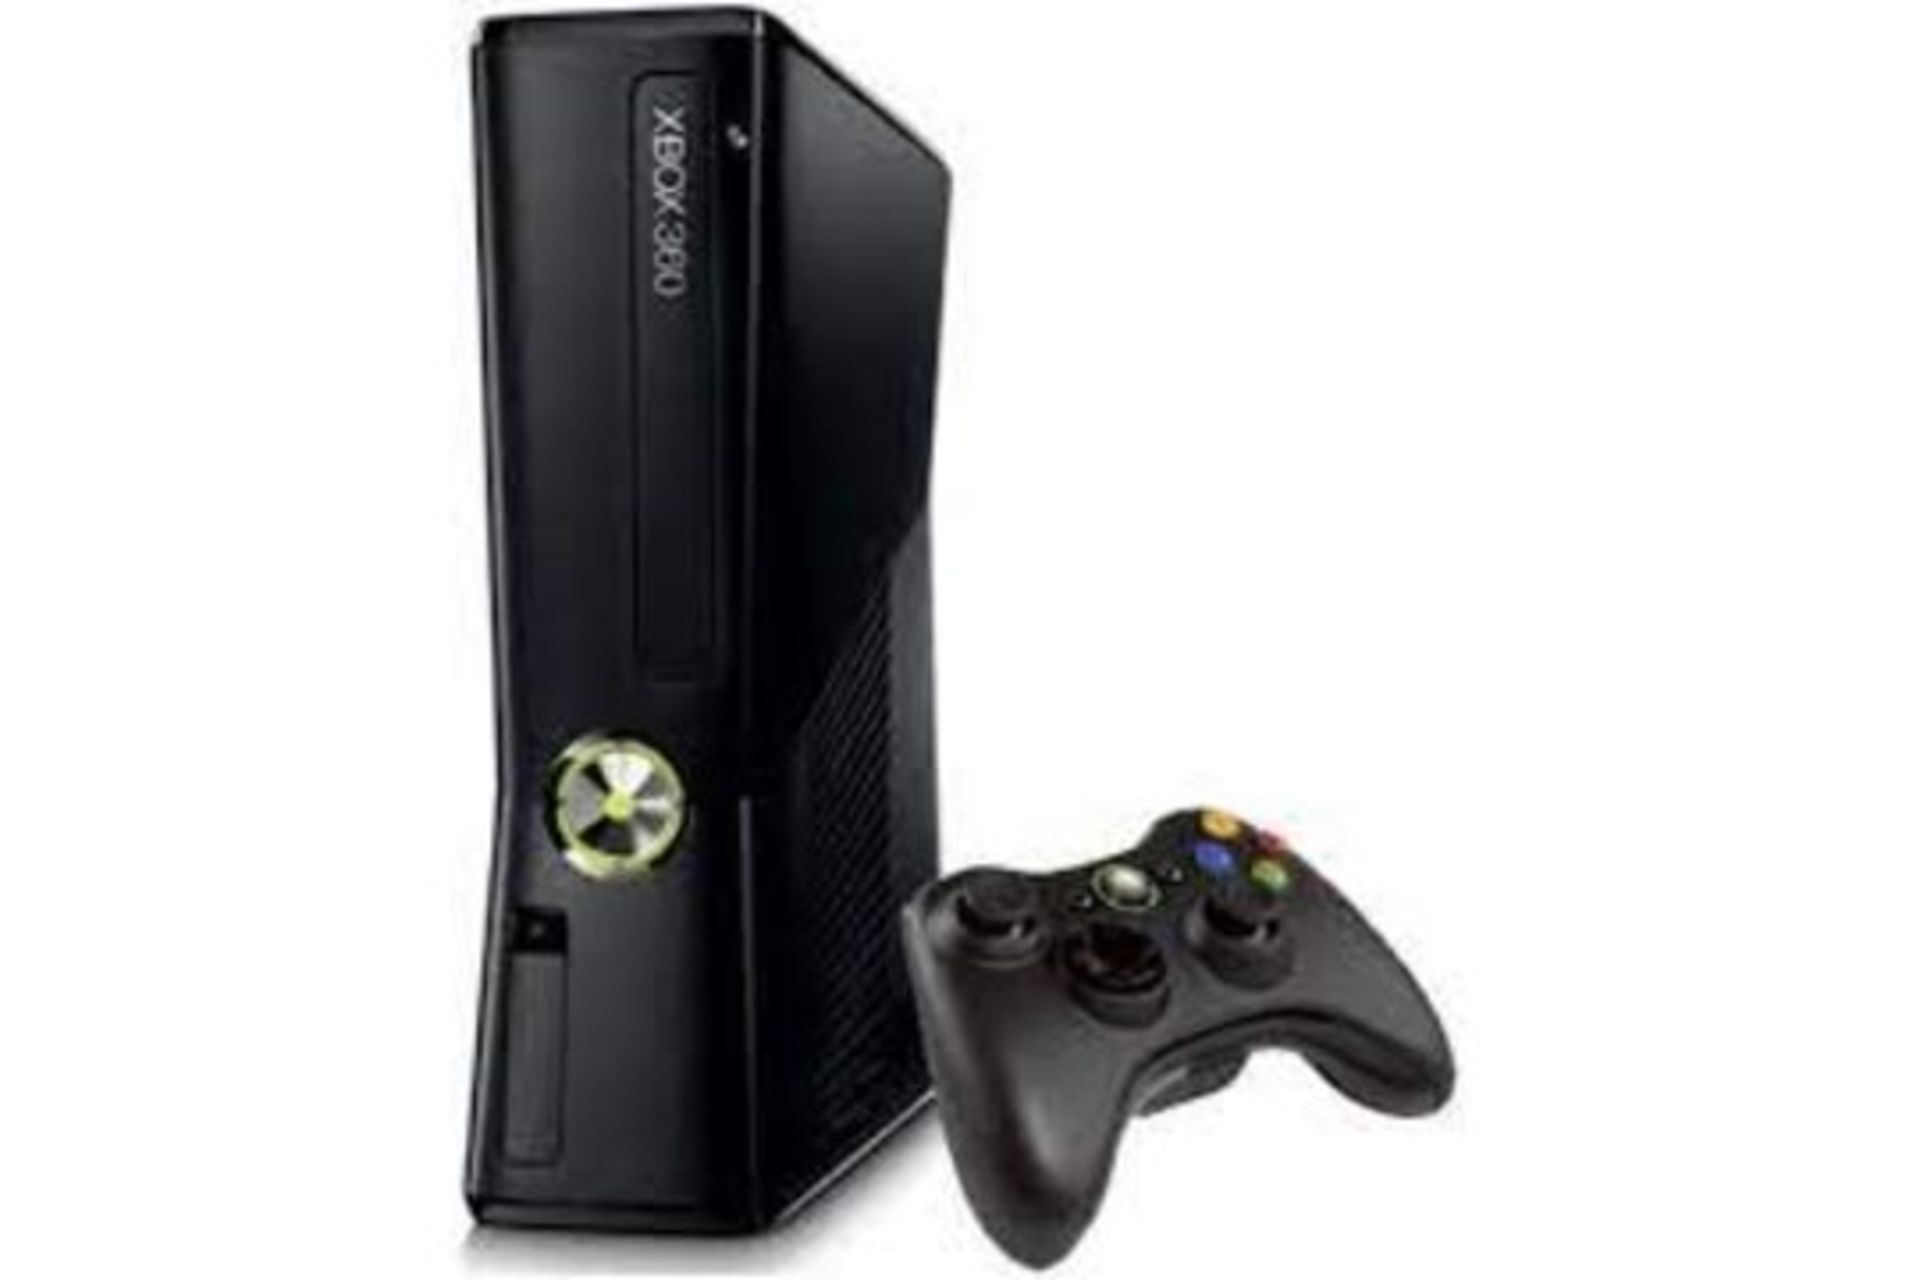 Xbox 360. 250GB. - BW The complete Xbox 360 experience, including a controller to play the latest